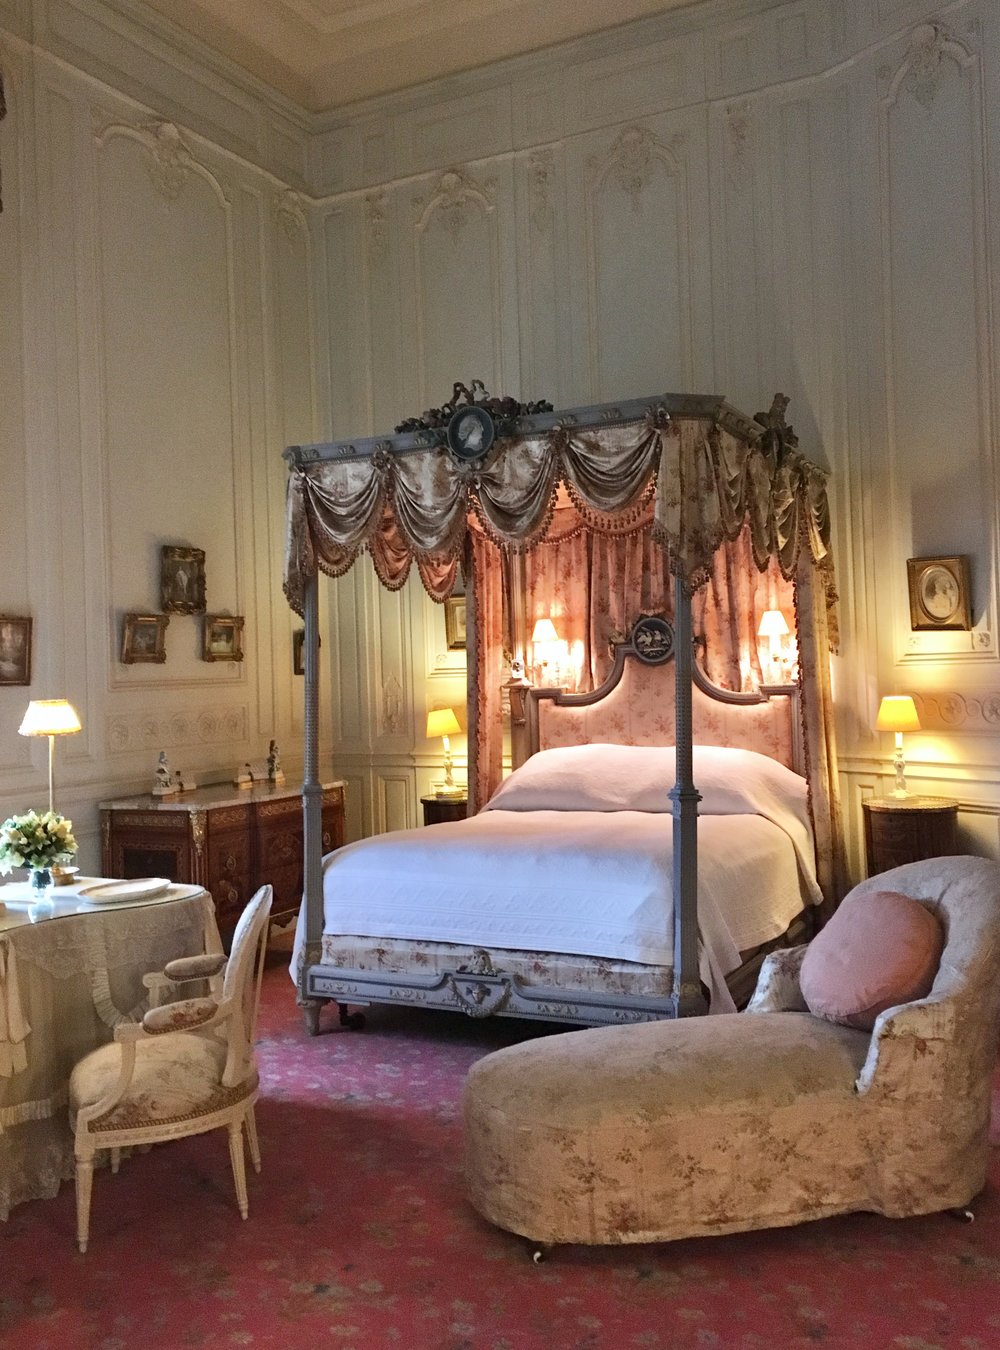 UK Waddesdon Manor architecture churchill bedroom National Trust French Chateau Rothschild Buckinghamshire garden chateau Eileen Hsieh Follow That Bug 2.jpg